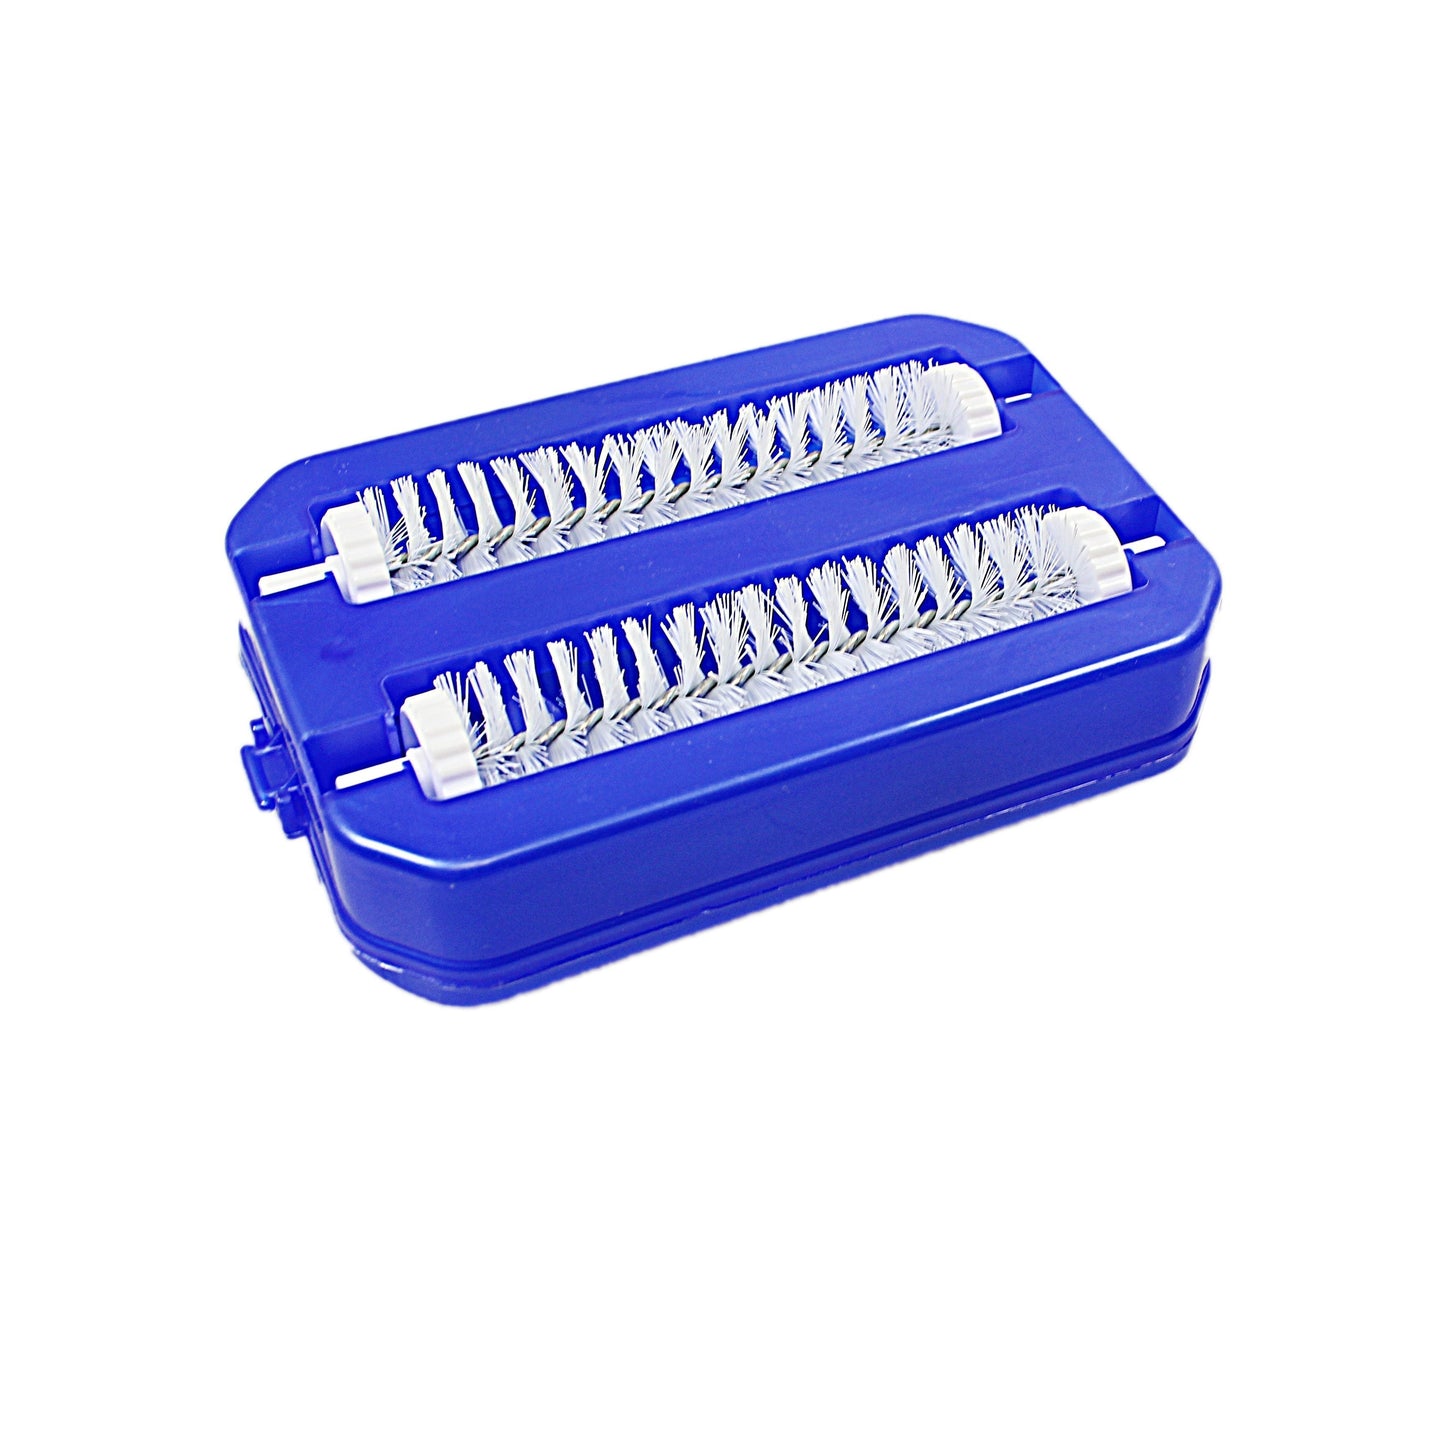 Mobile Cleaning Roller Set 2 Brush in 1 Glider Assorted Colour Available x 1 4107 (Parcel Rate)